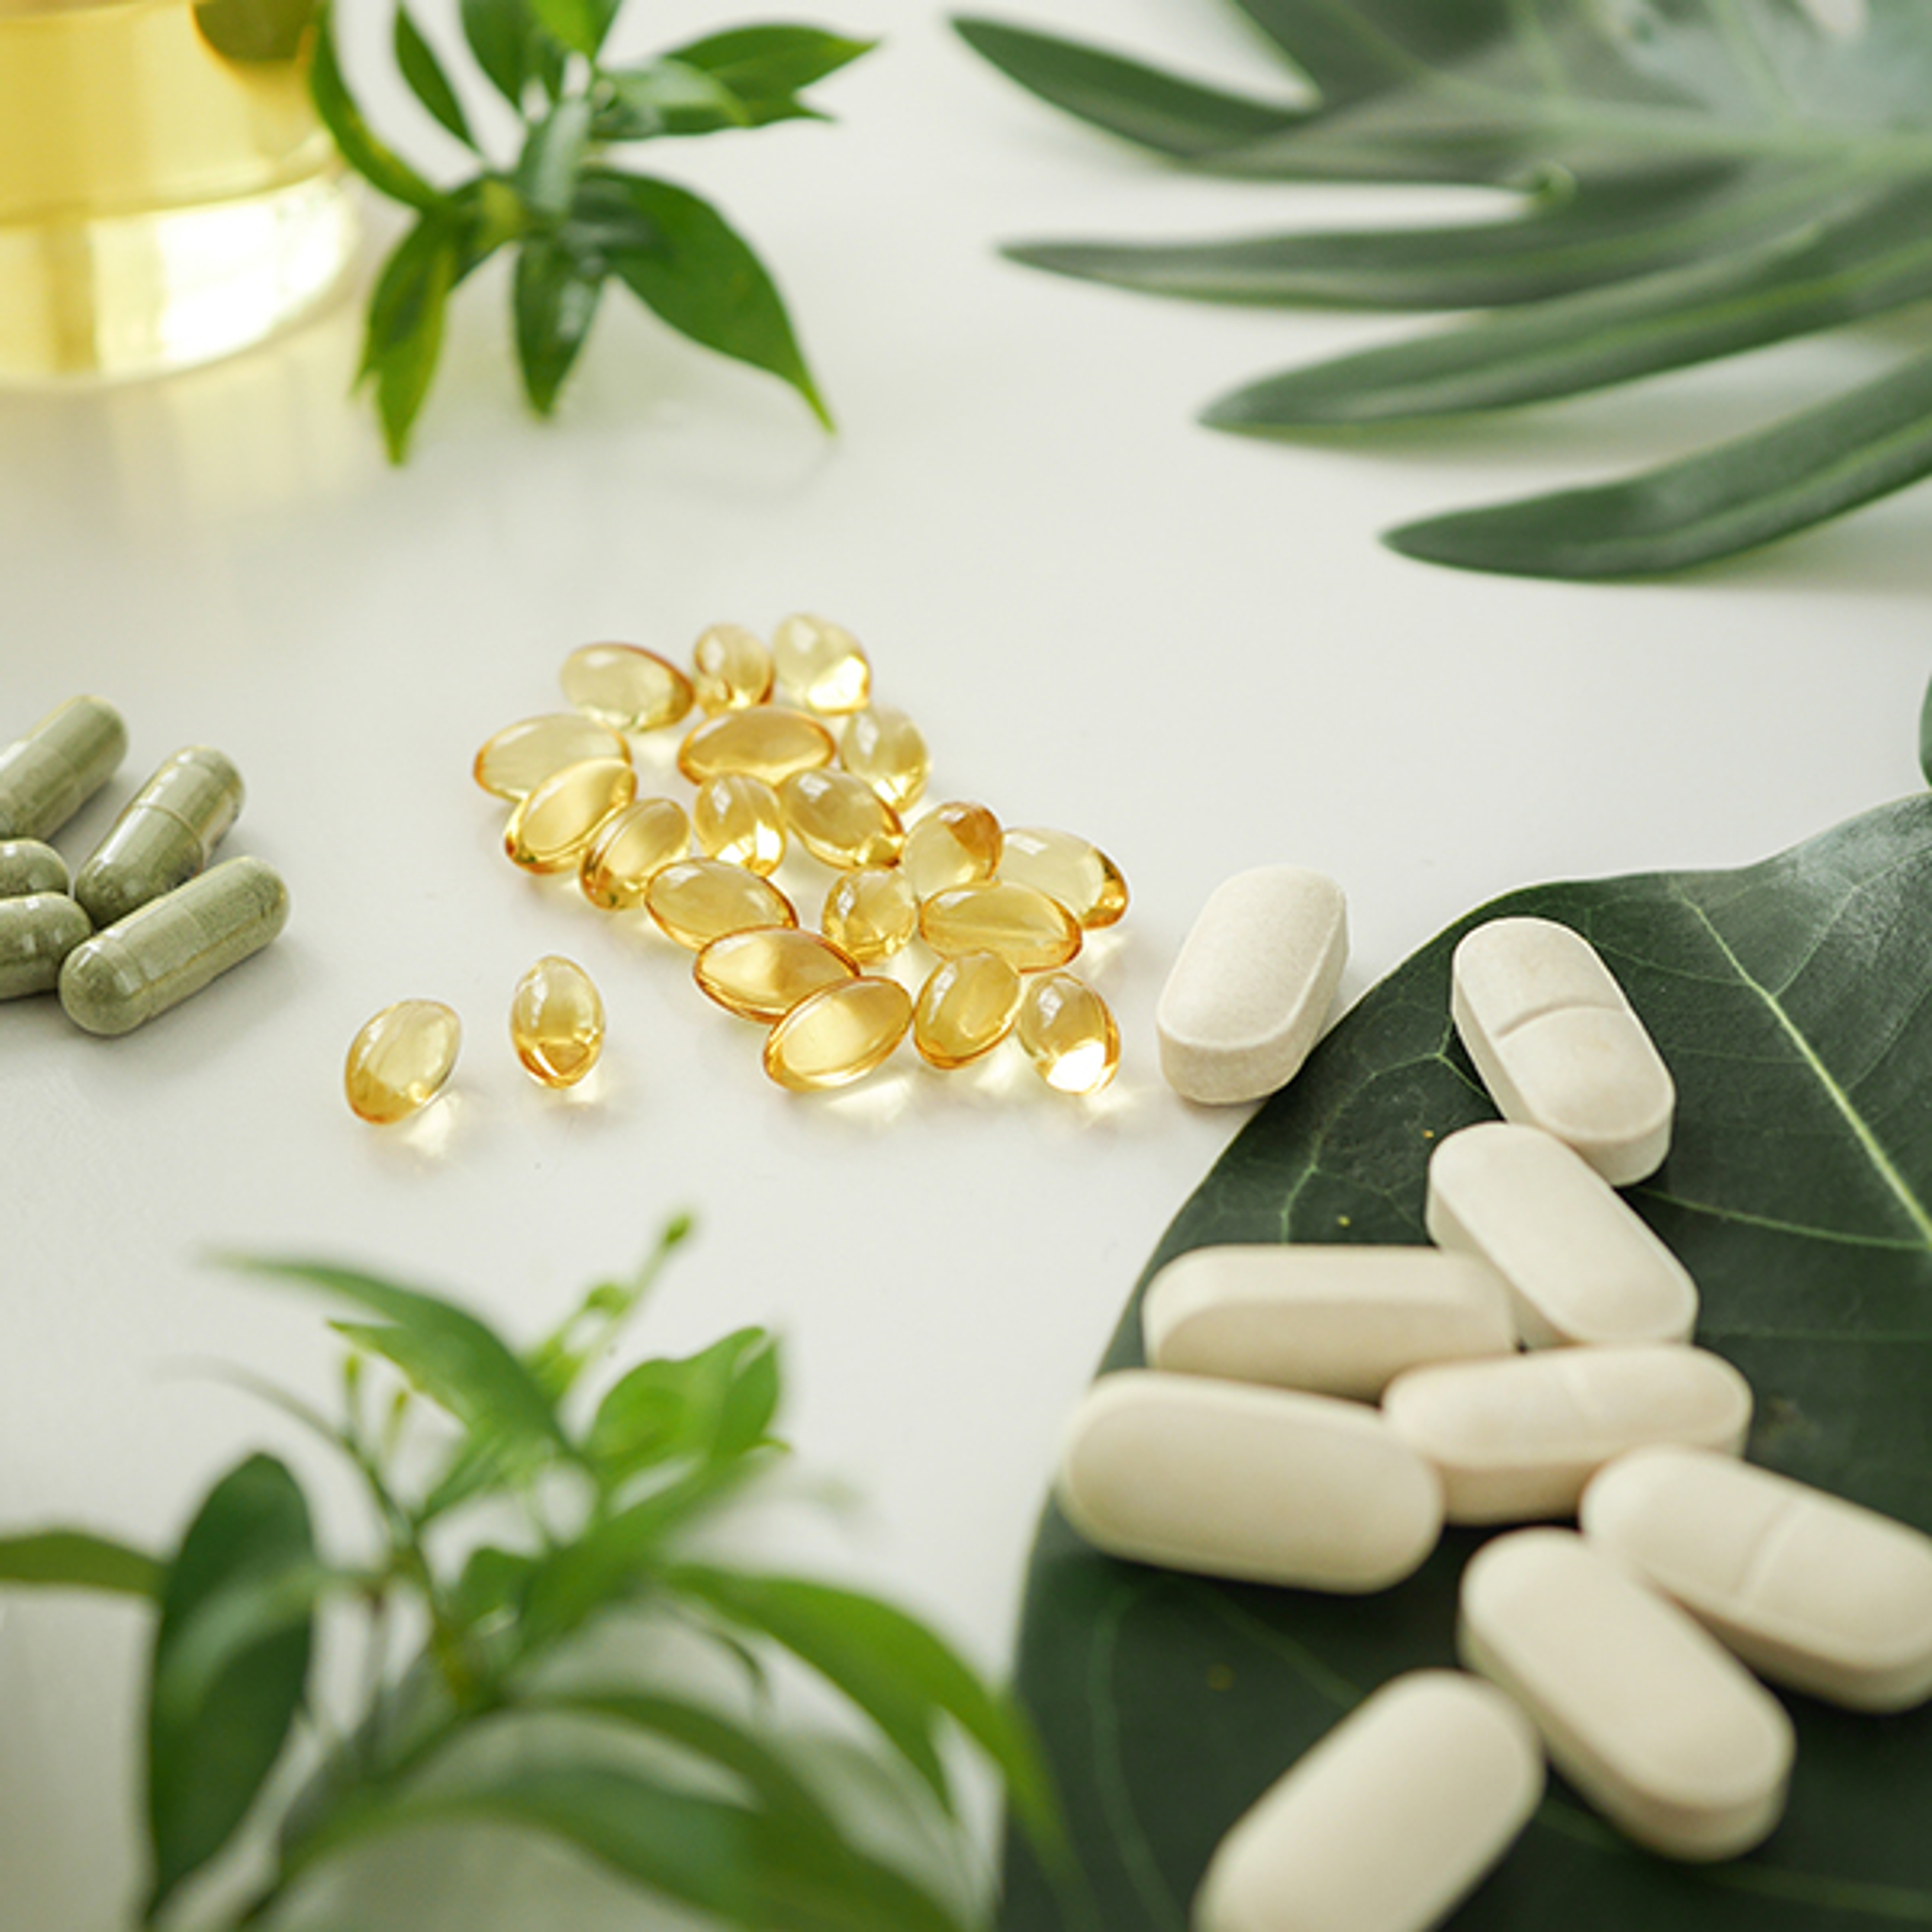 Vitamins - The basis for our health